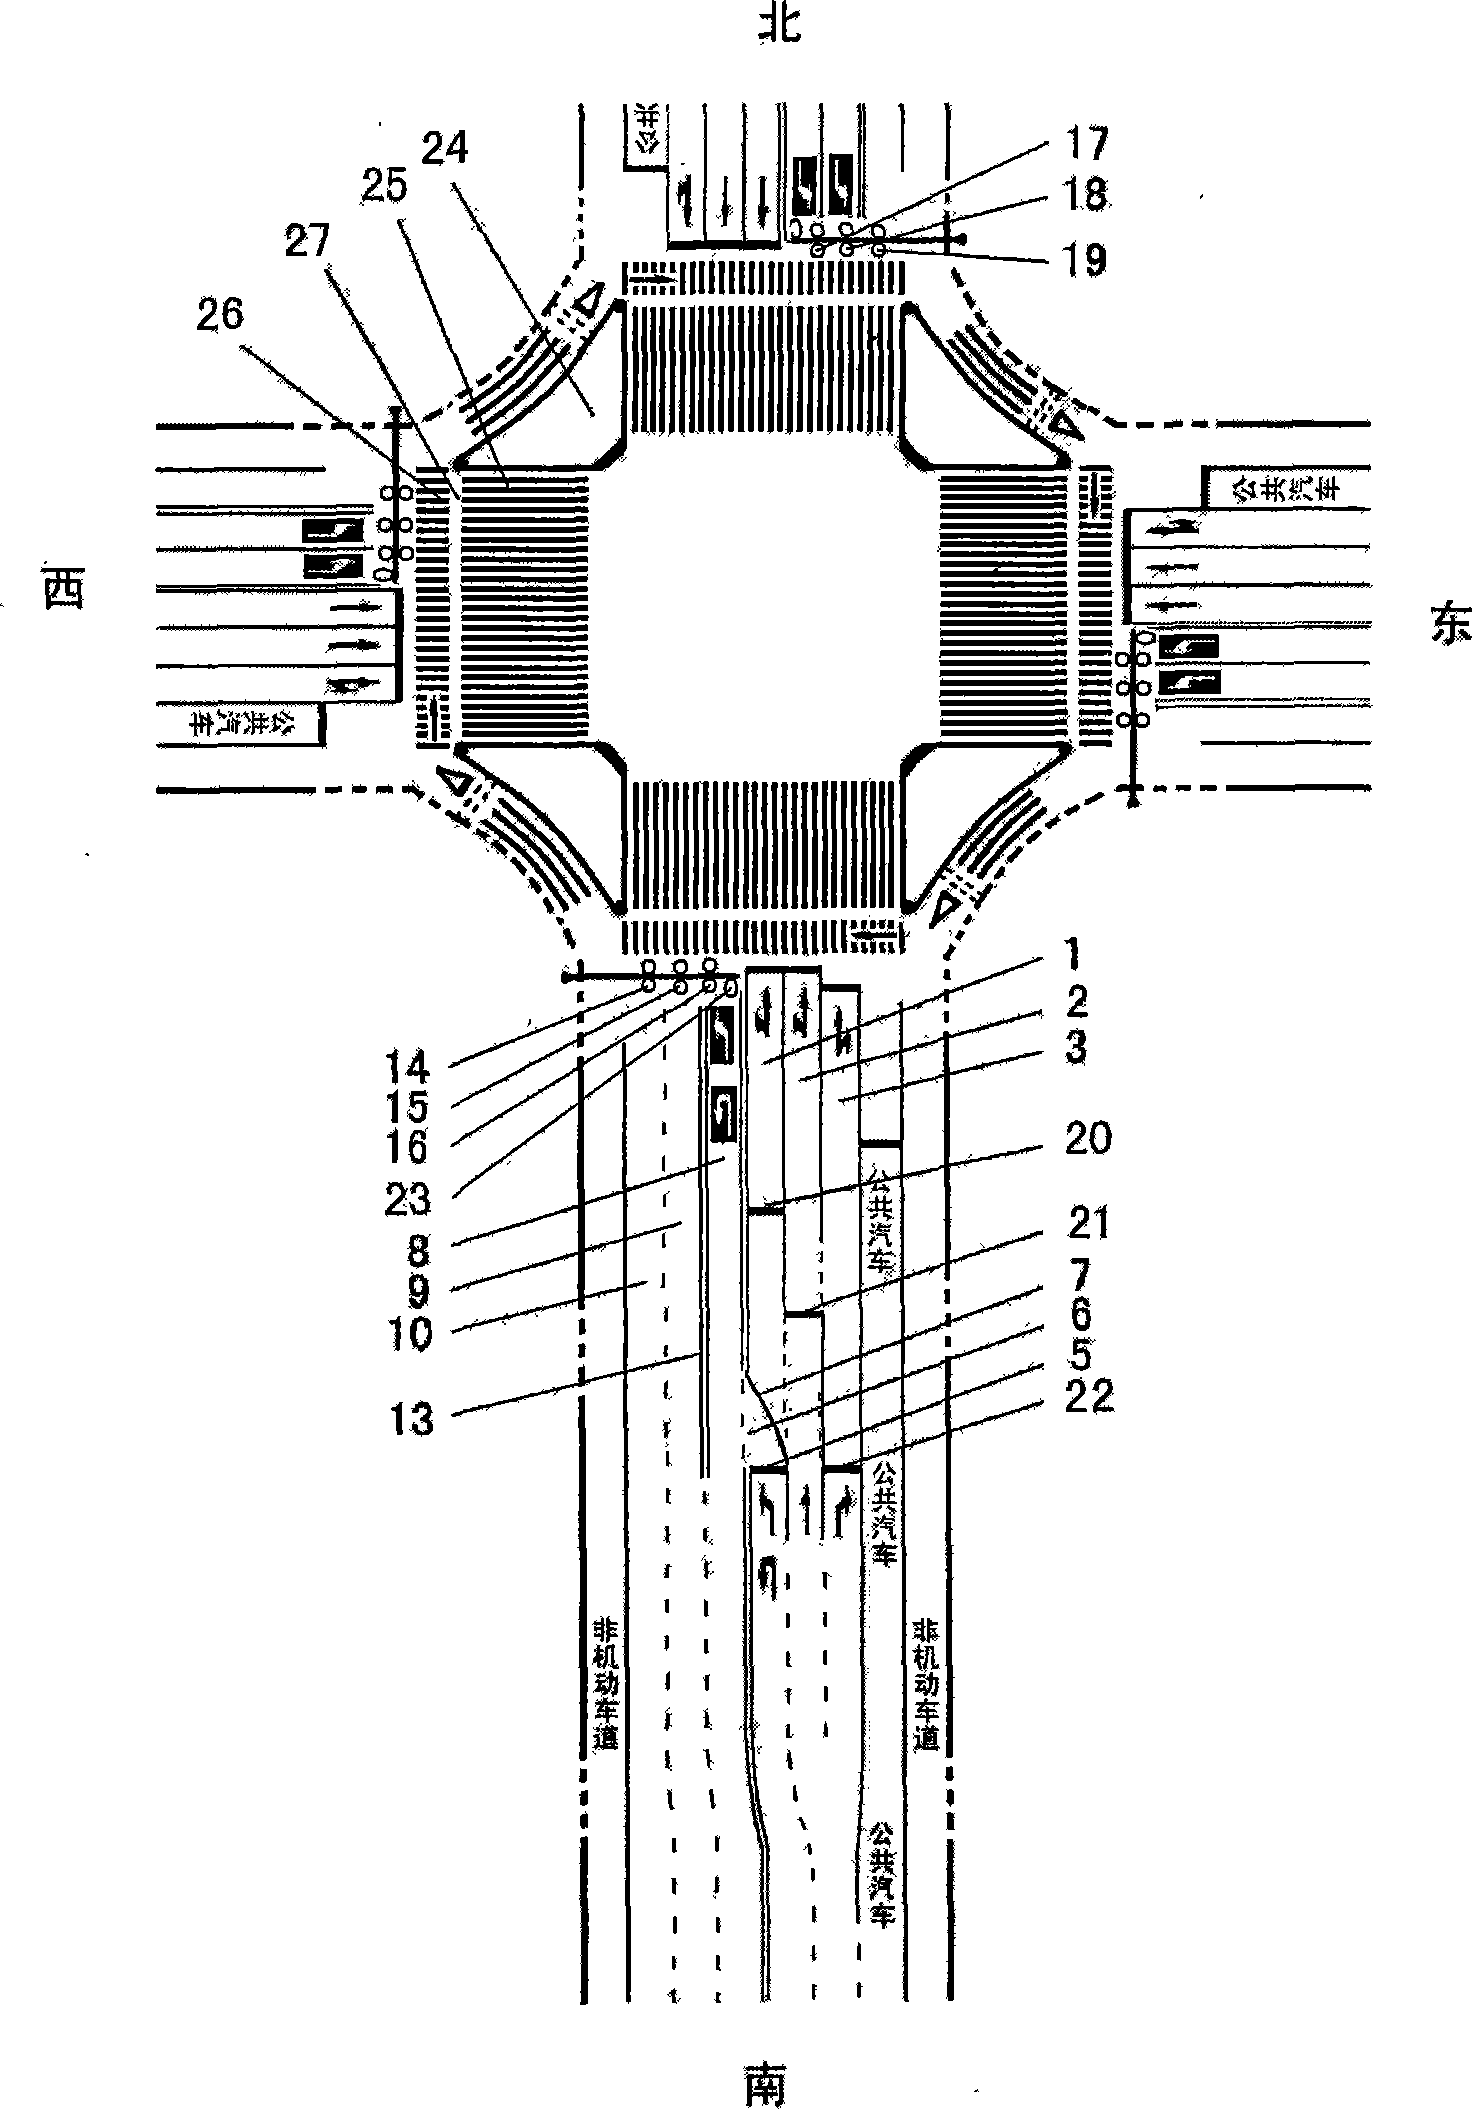 Method for setting road traffic signal and controlling crossing traffic